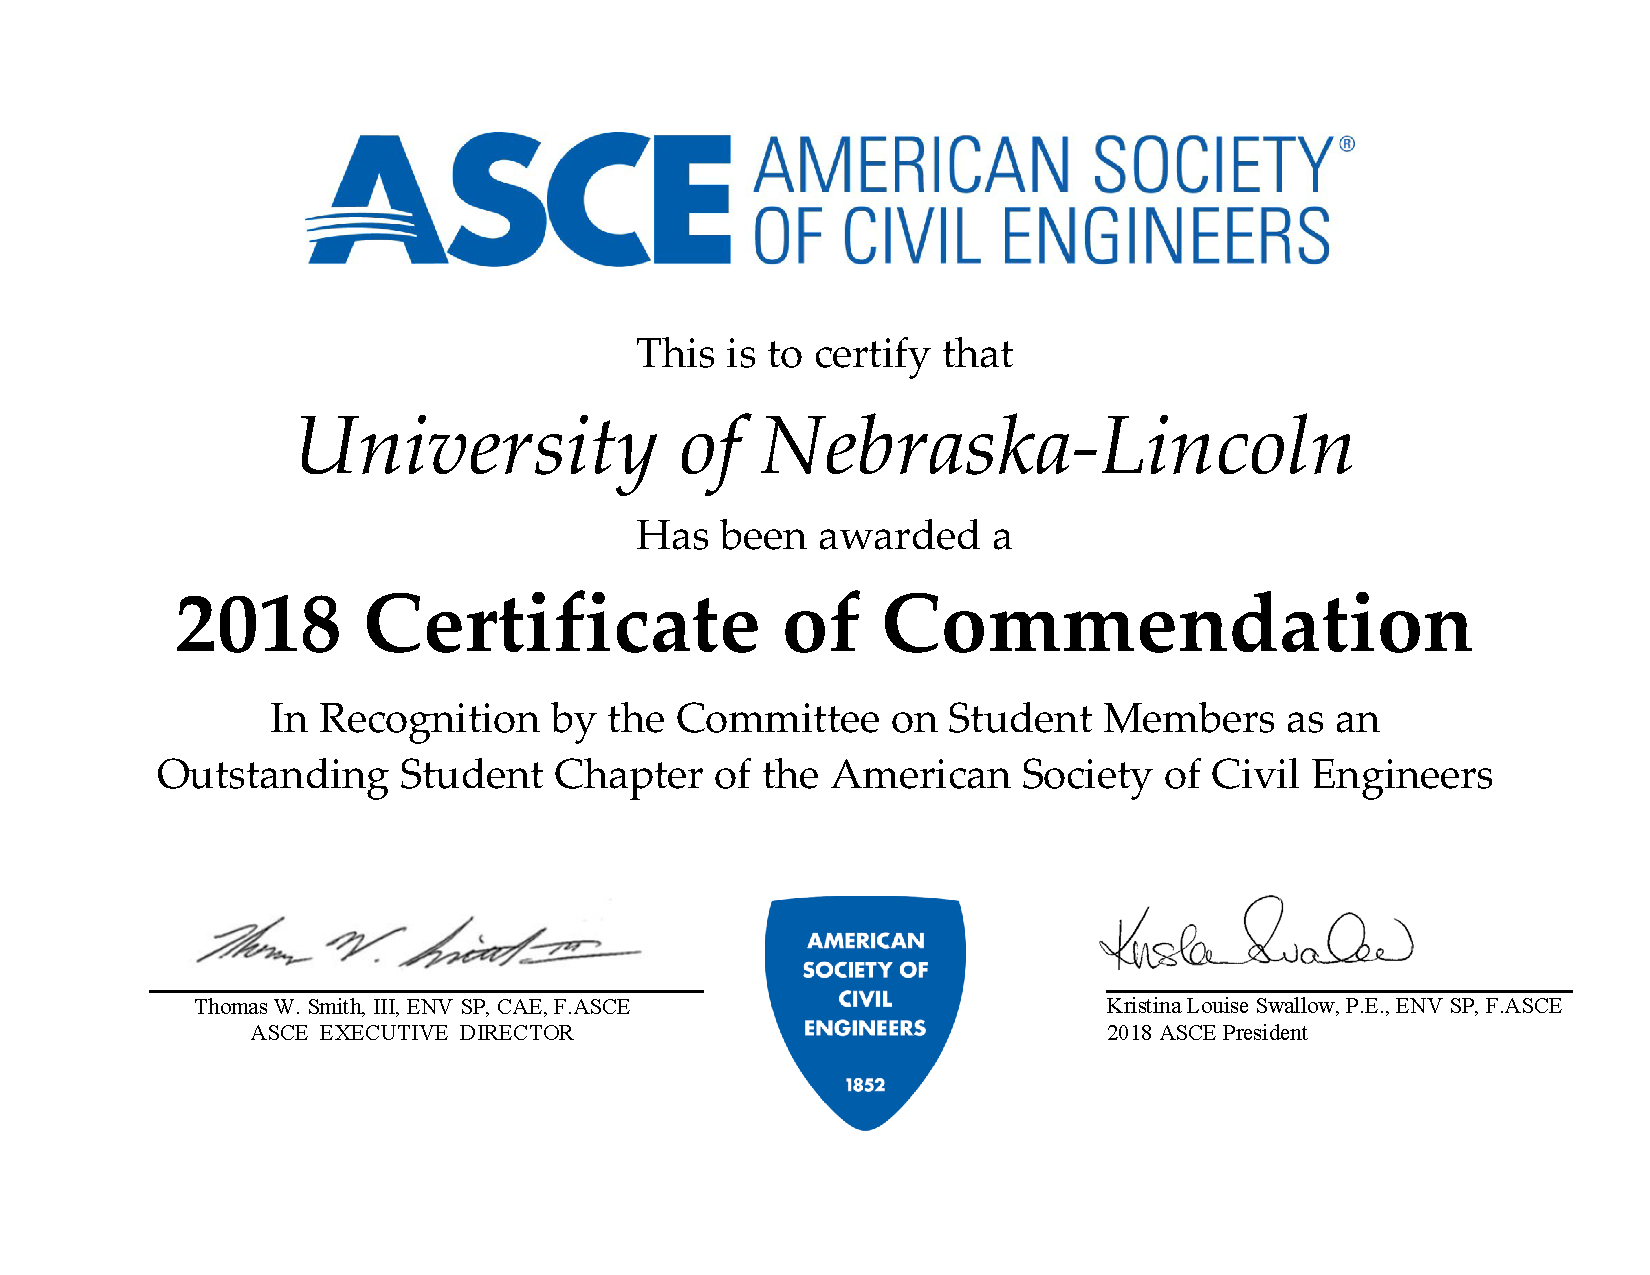 UNL ASCE earns Certificate of Commendation Announce University of